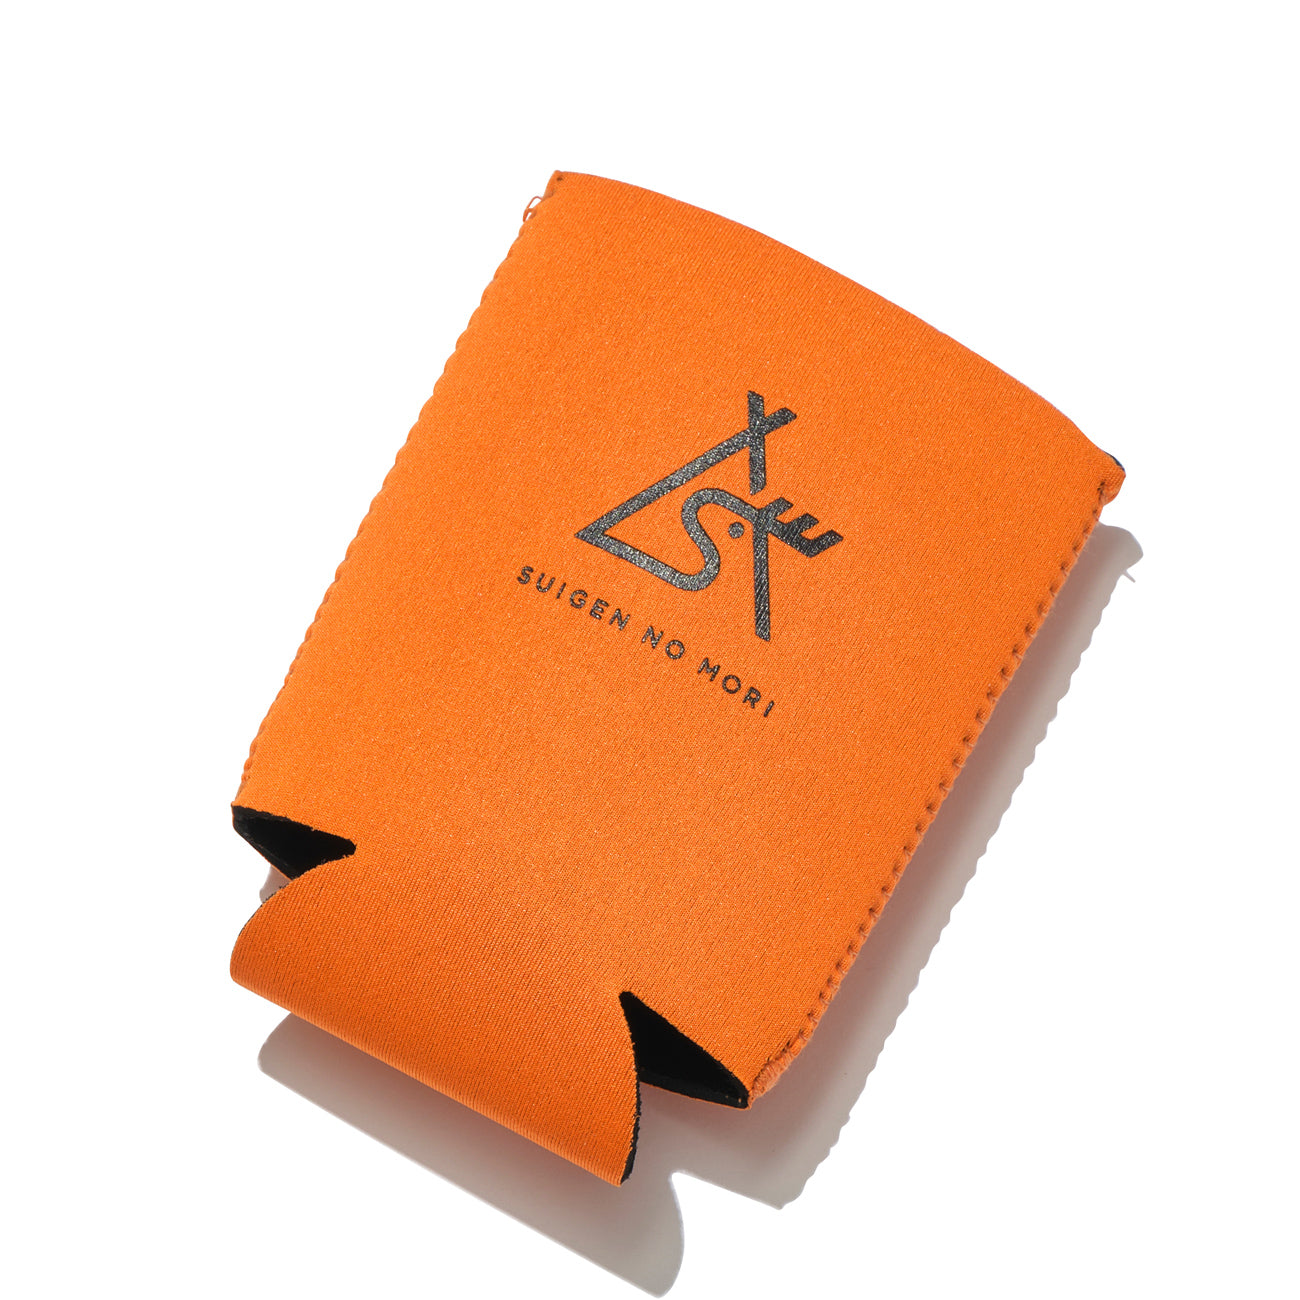 Mountain Research /  Koozie